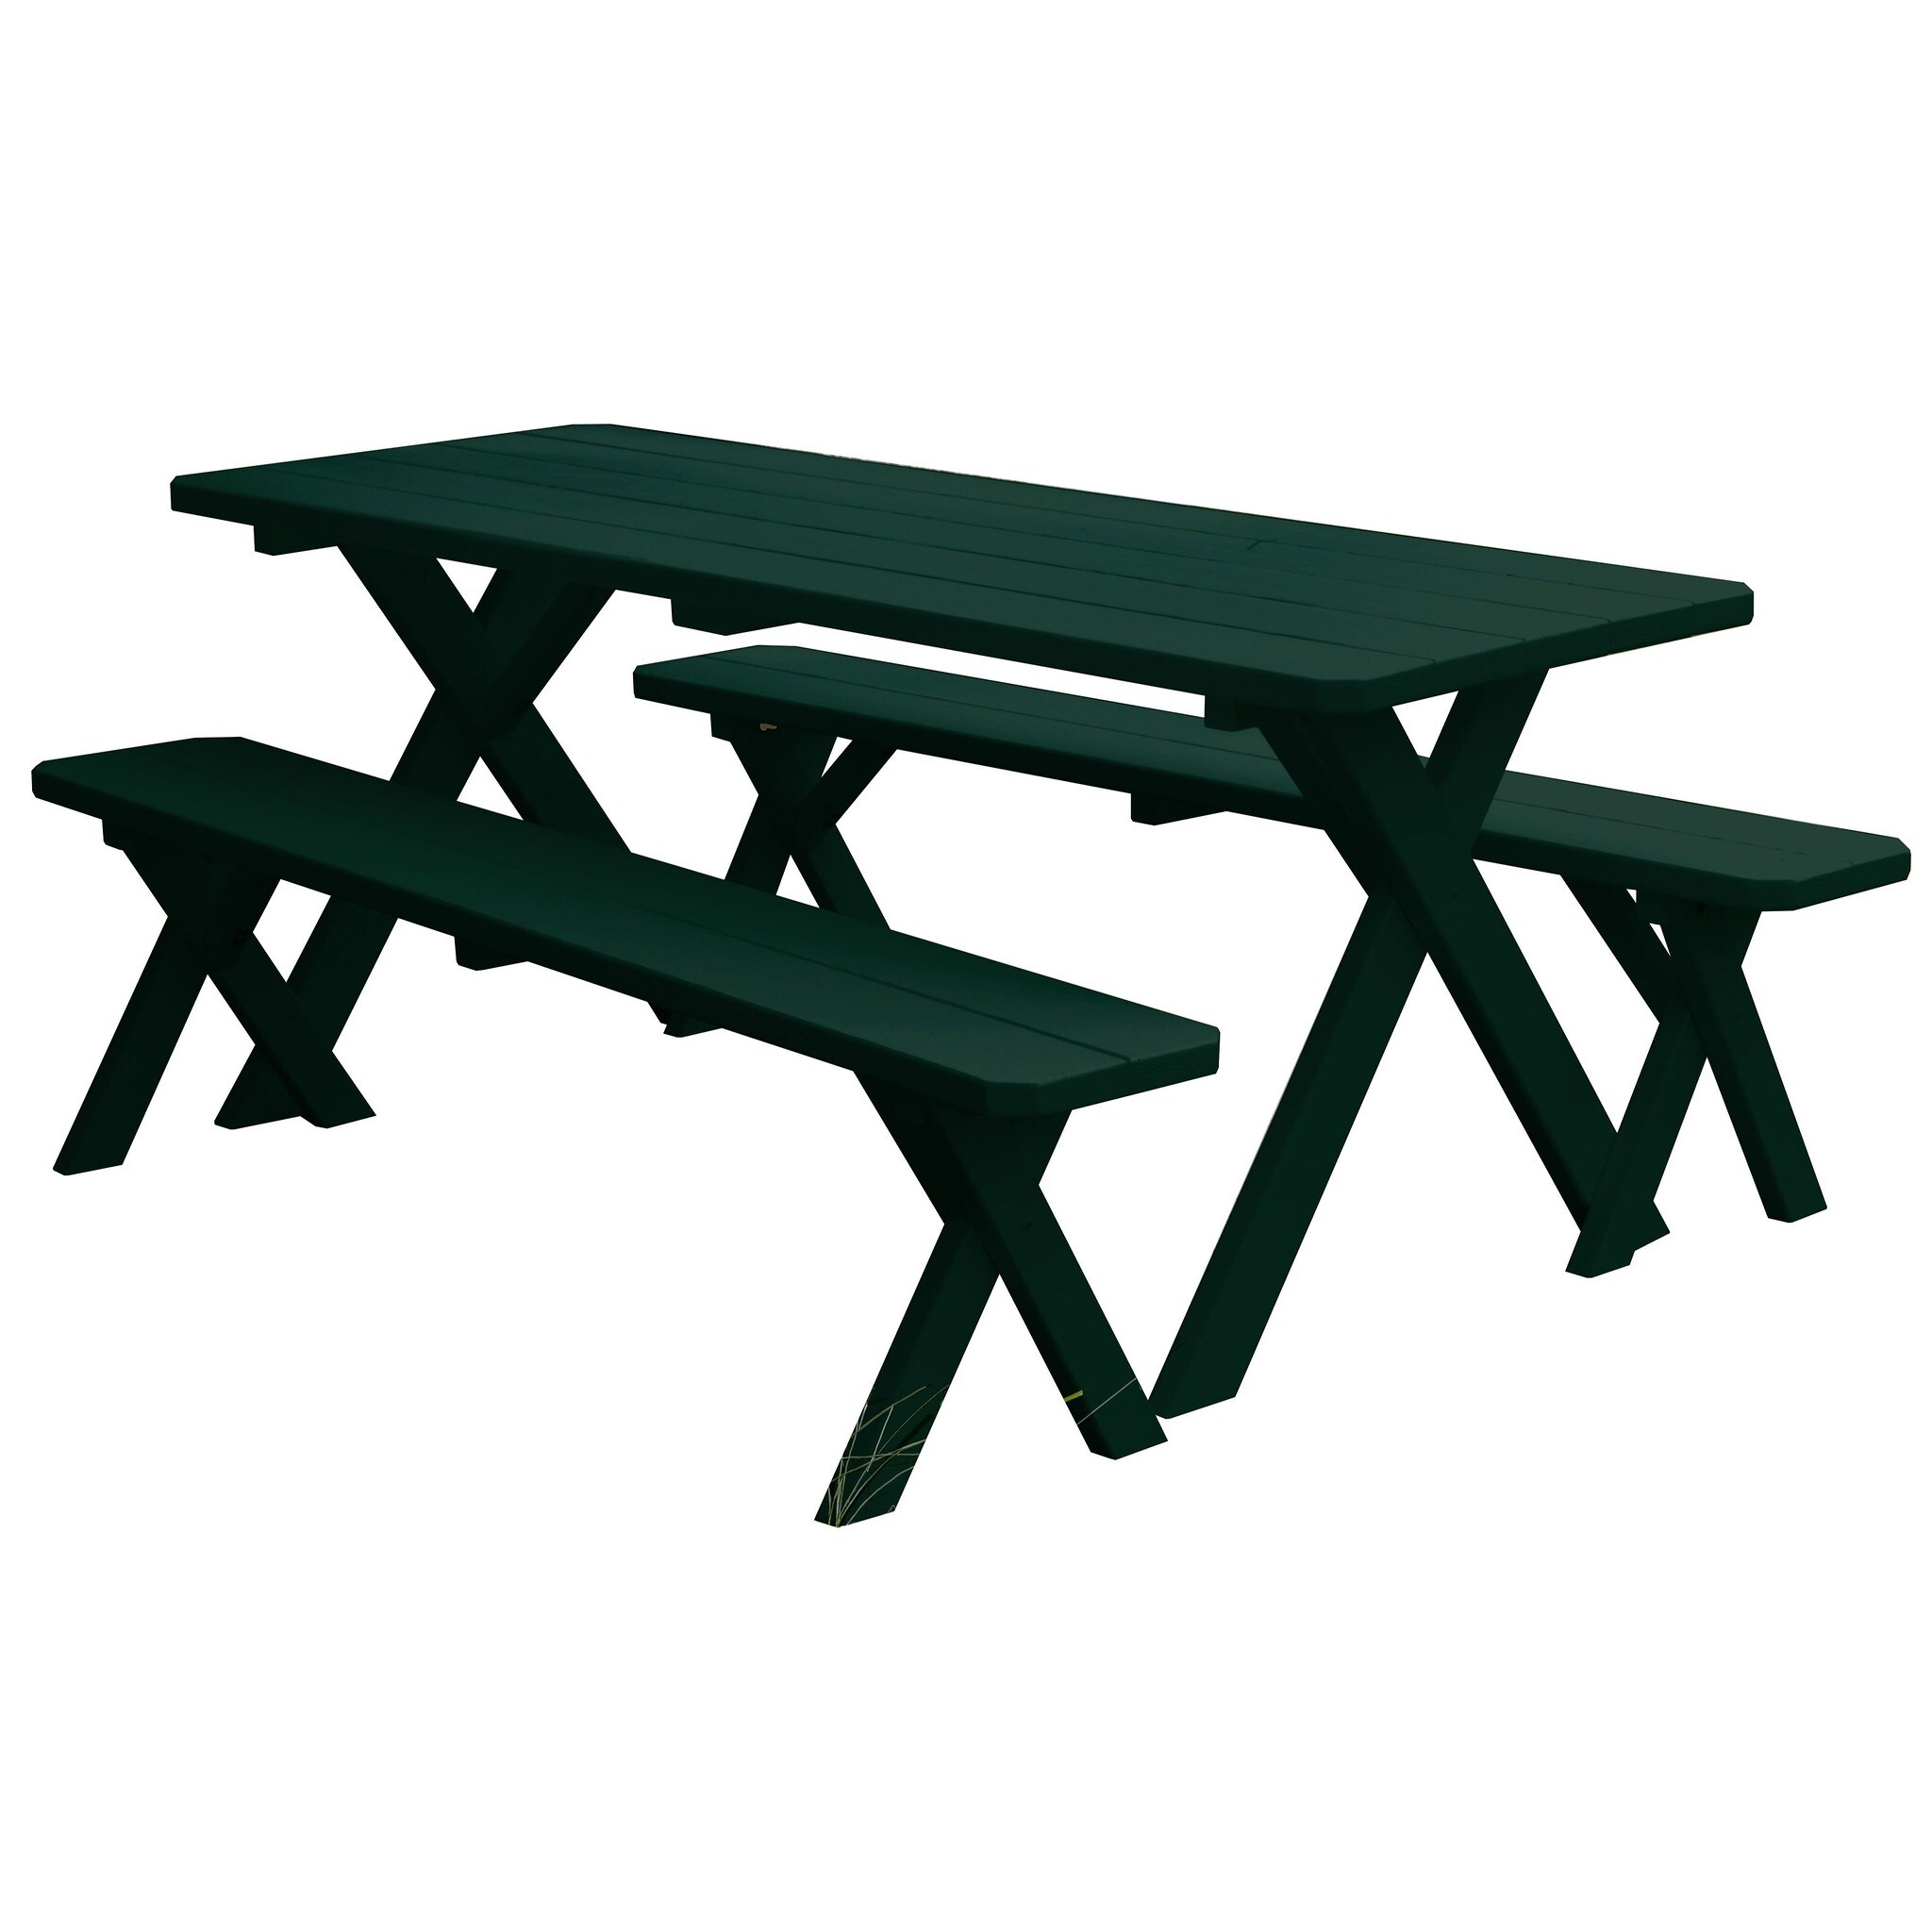 Pine 5 Cross-leg Picnic Table With 2 Benches